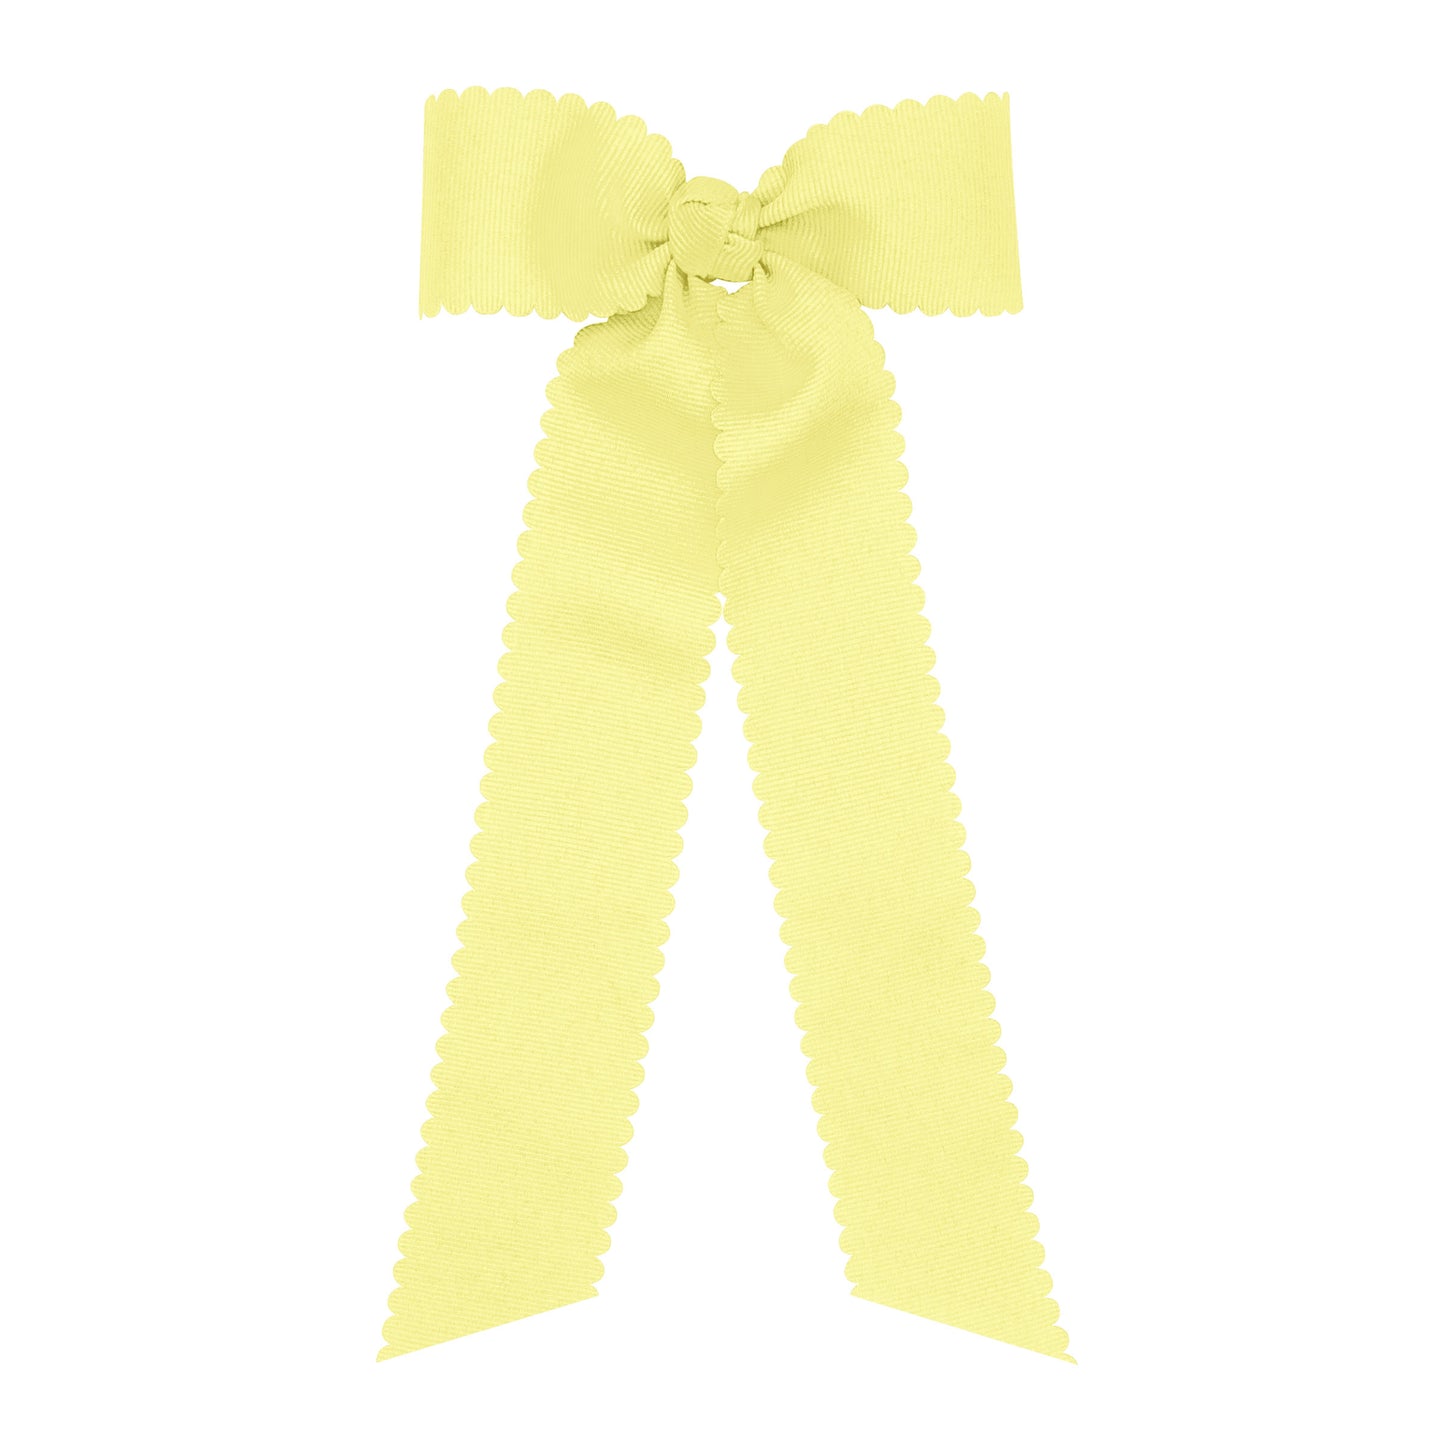 Wee Ones Medium Scalloped Edge Grosgrain Bow with Streamer Tails